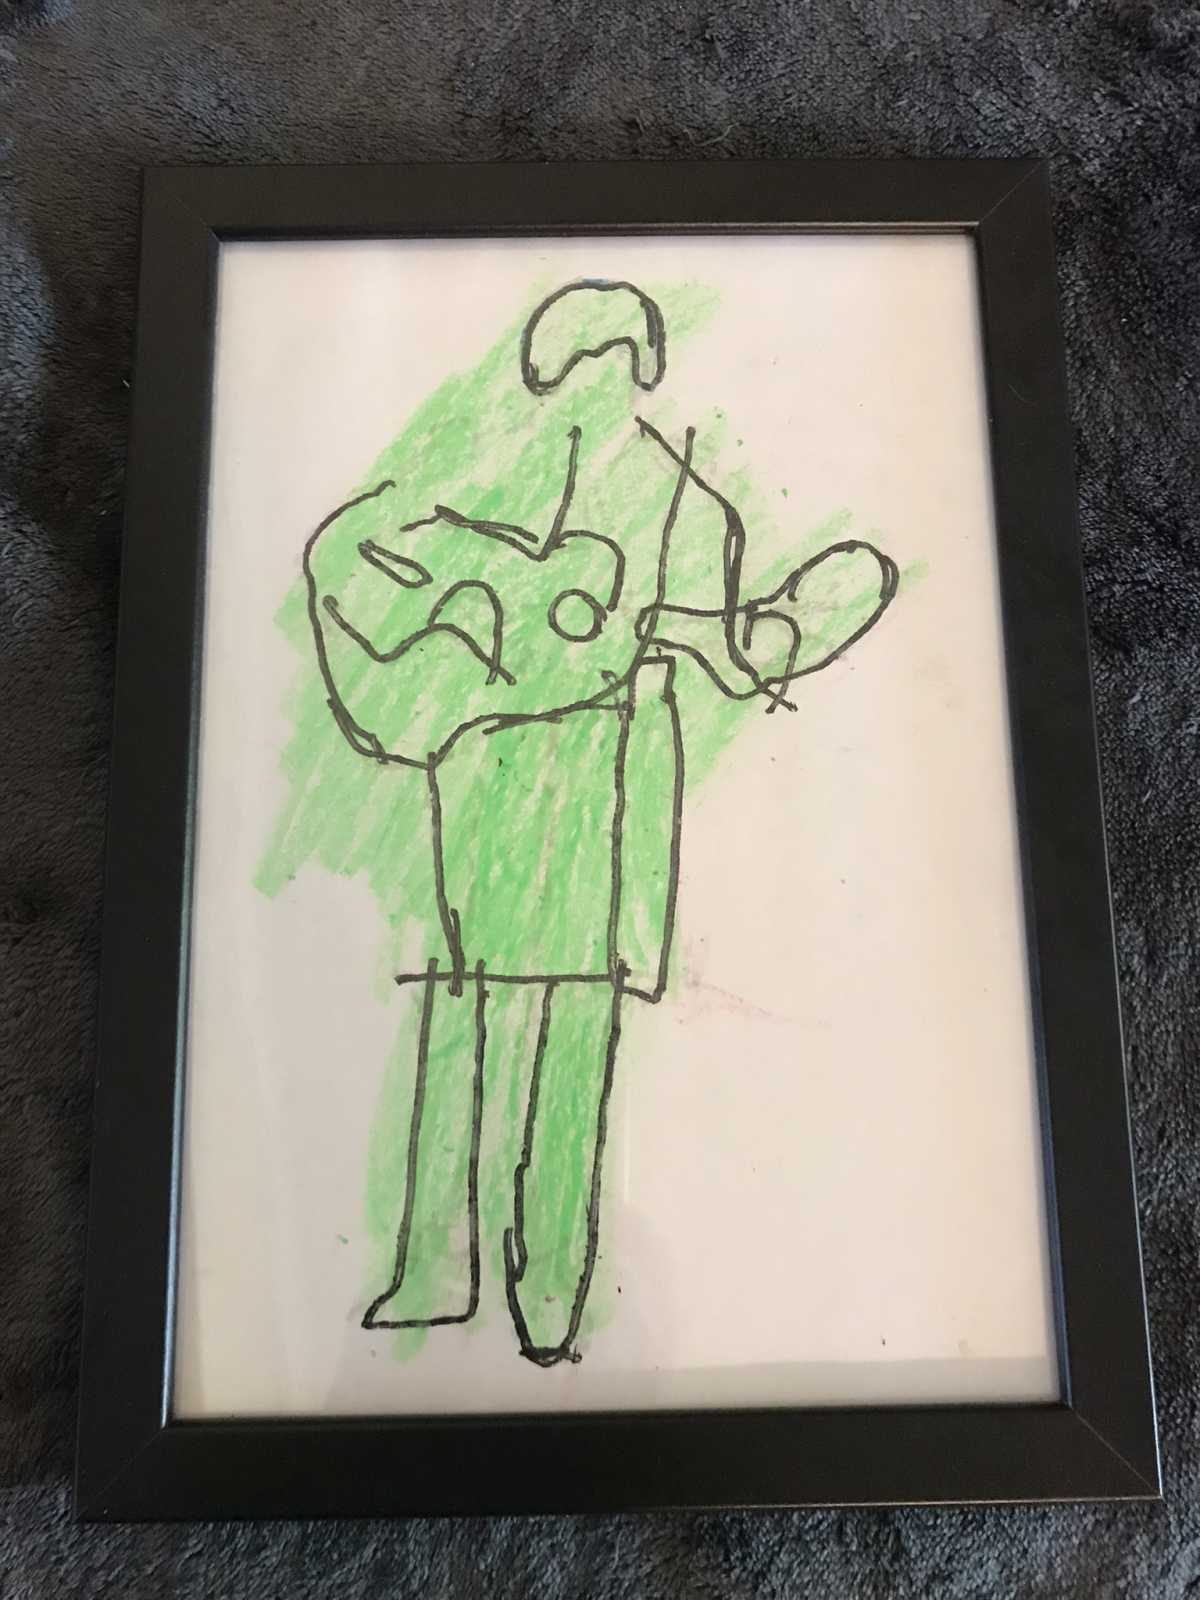 Emily's drawing of a member of the Beatles.